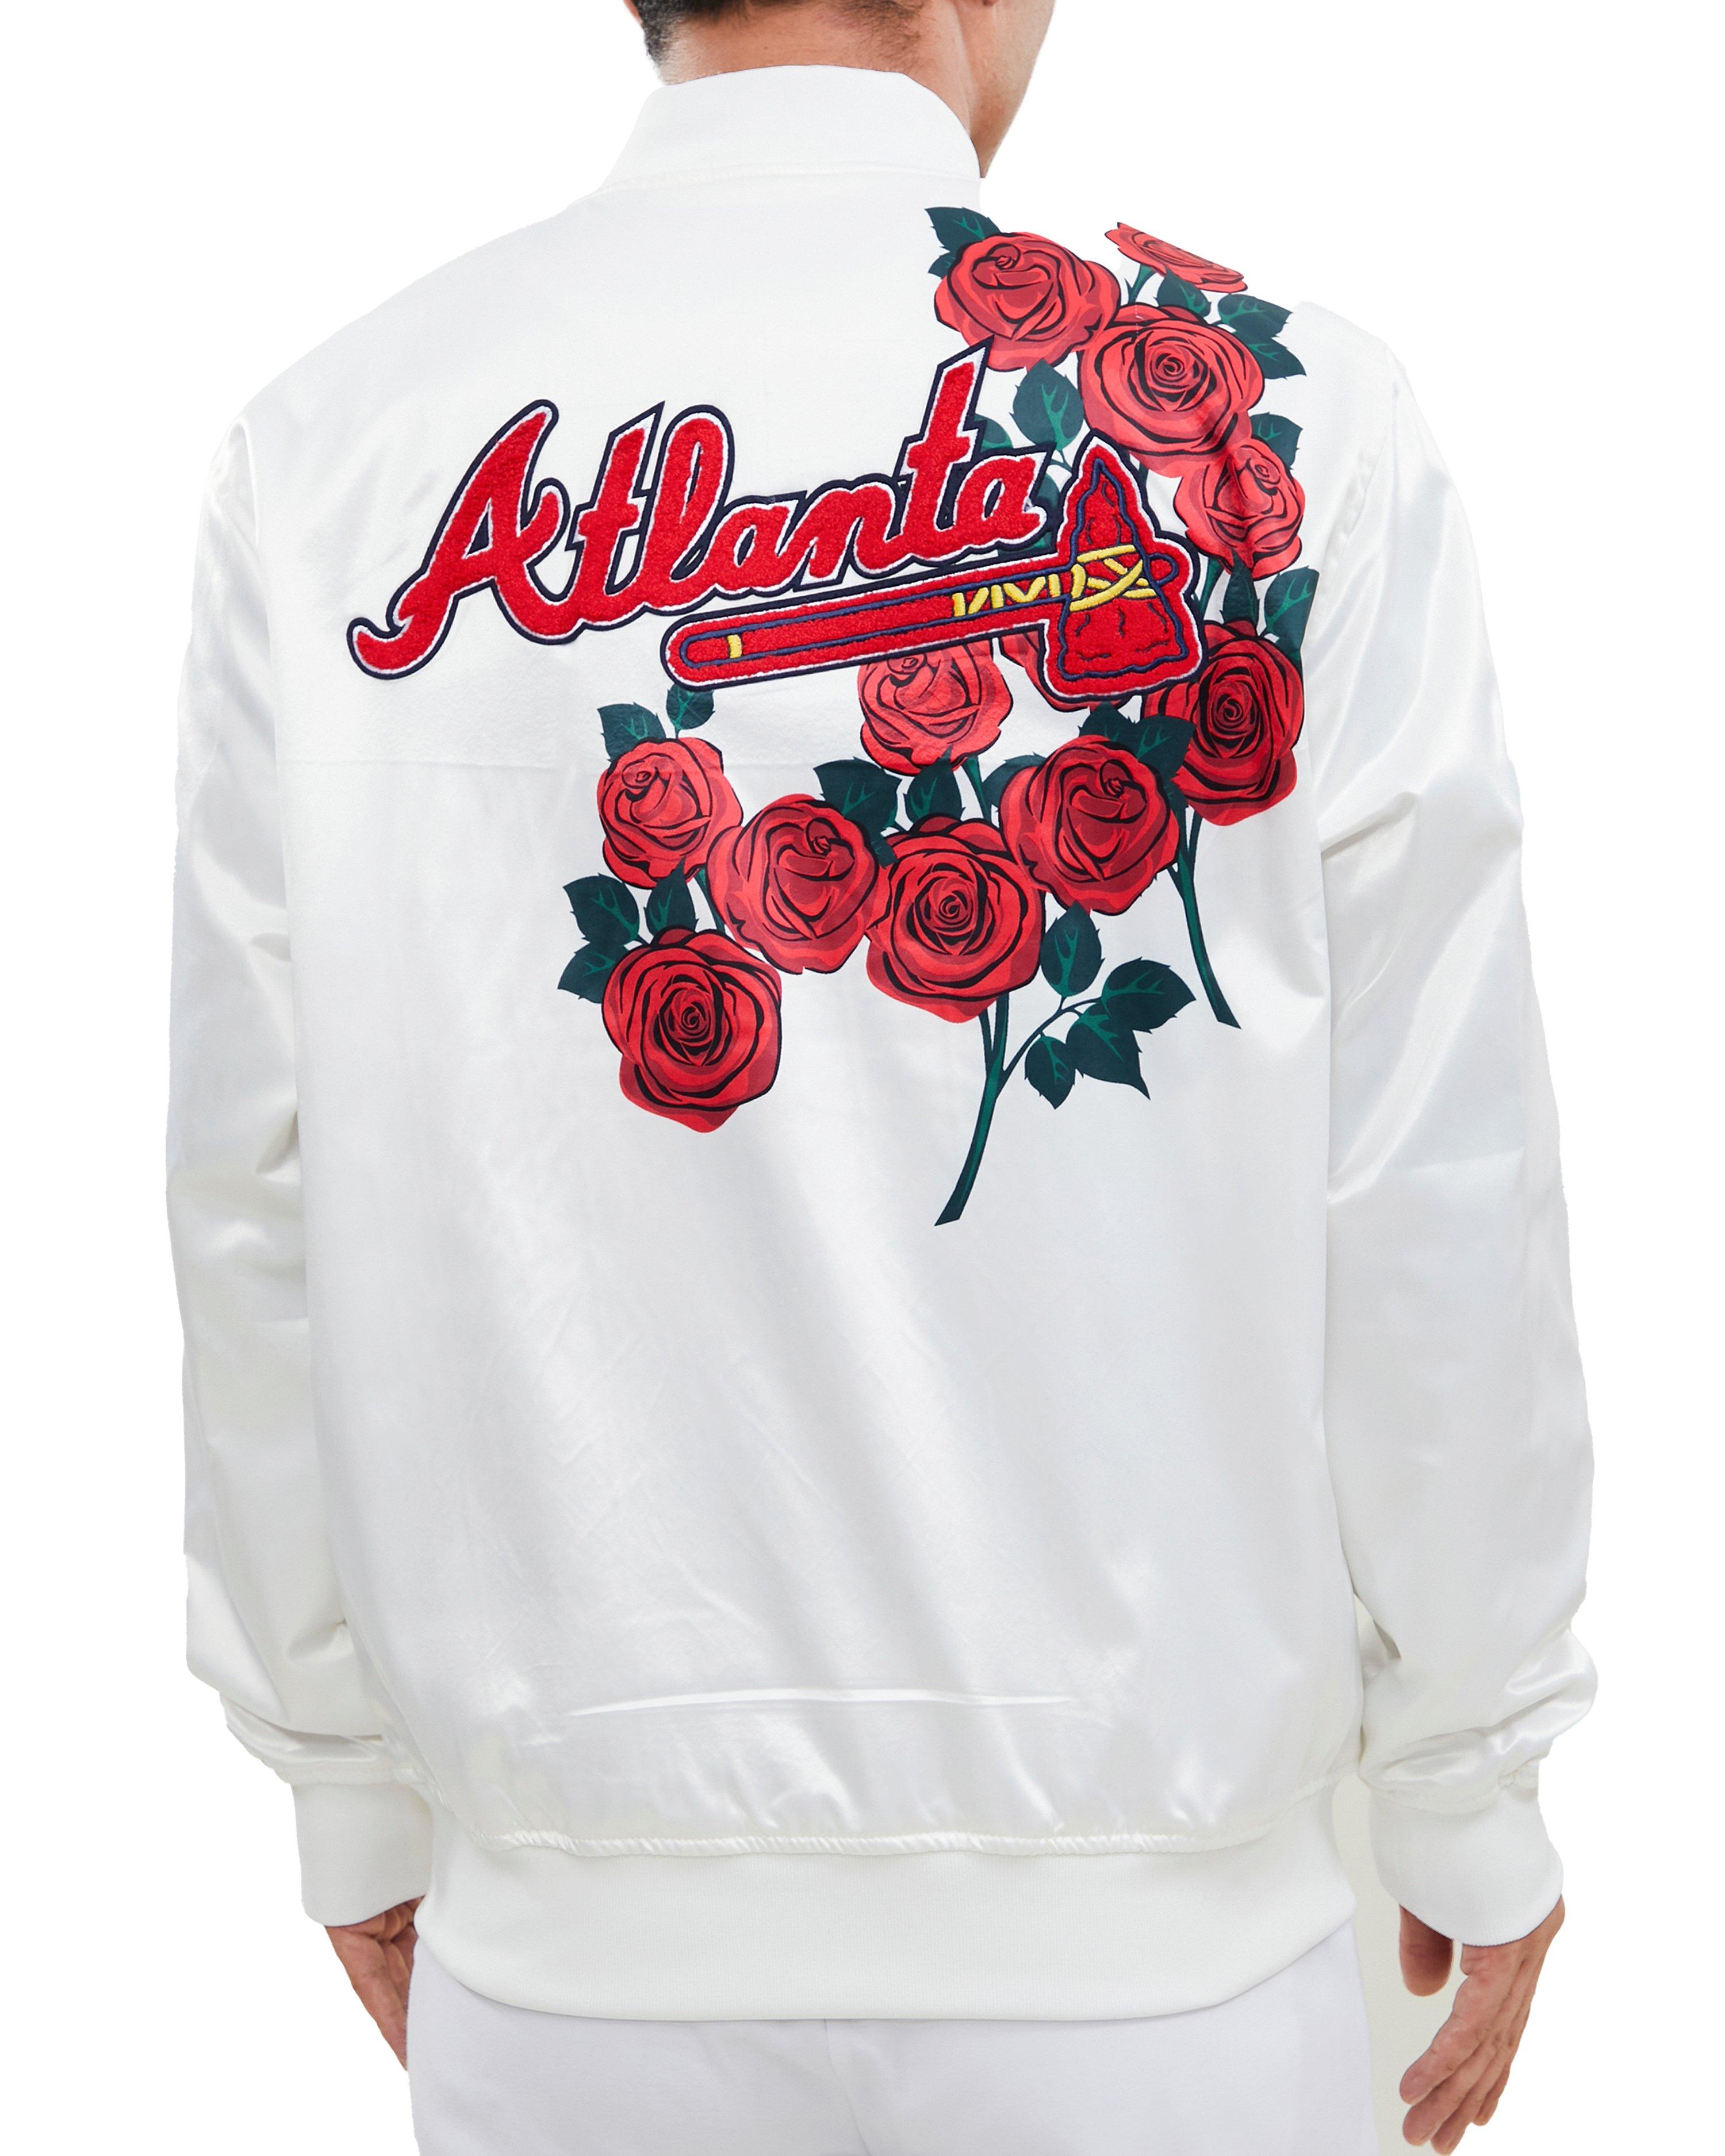 Step up your winter style with a satin jacket from the Braves